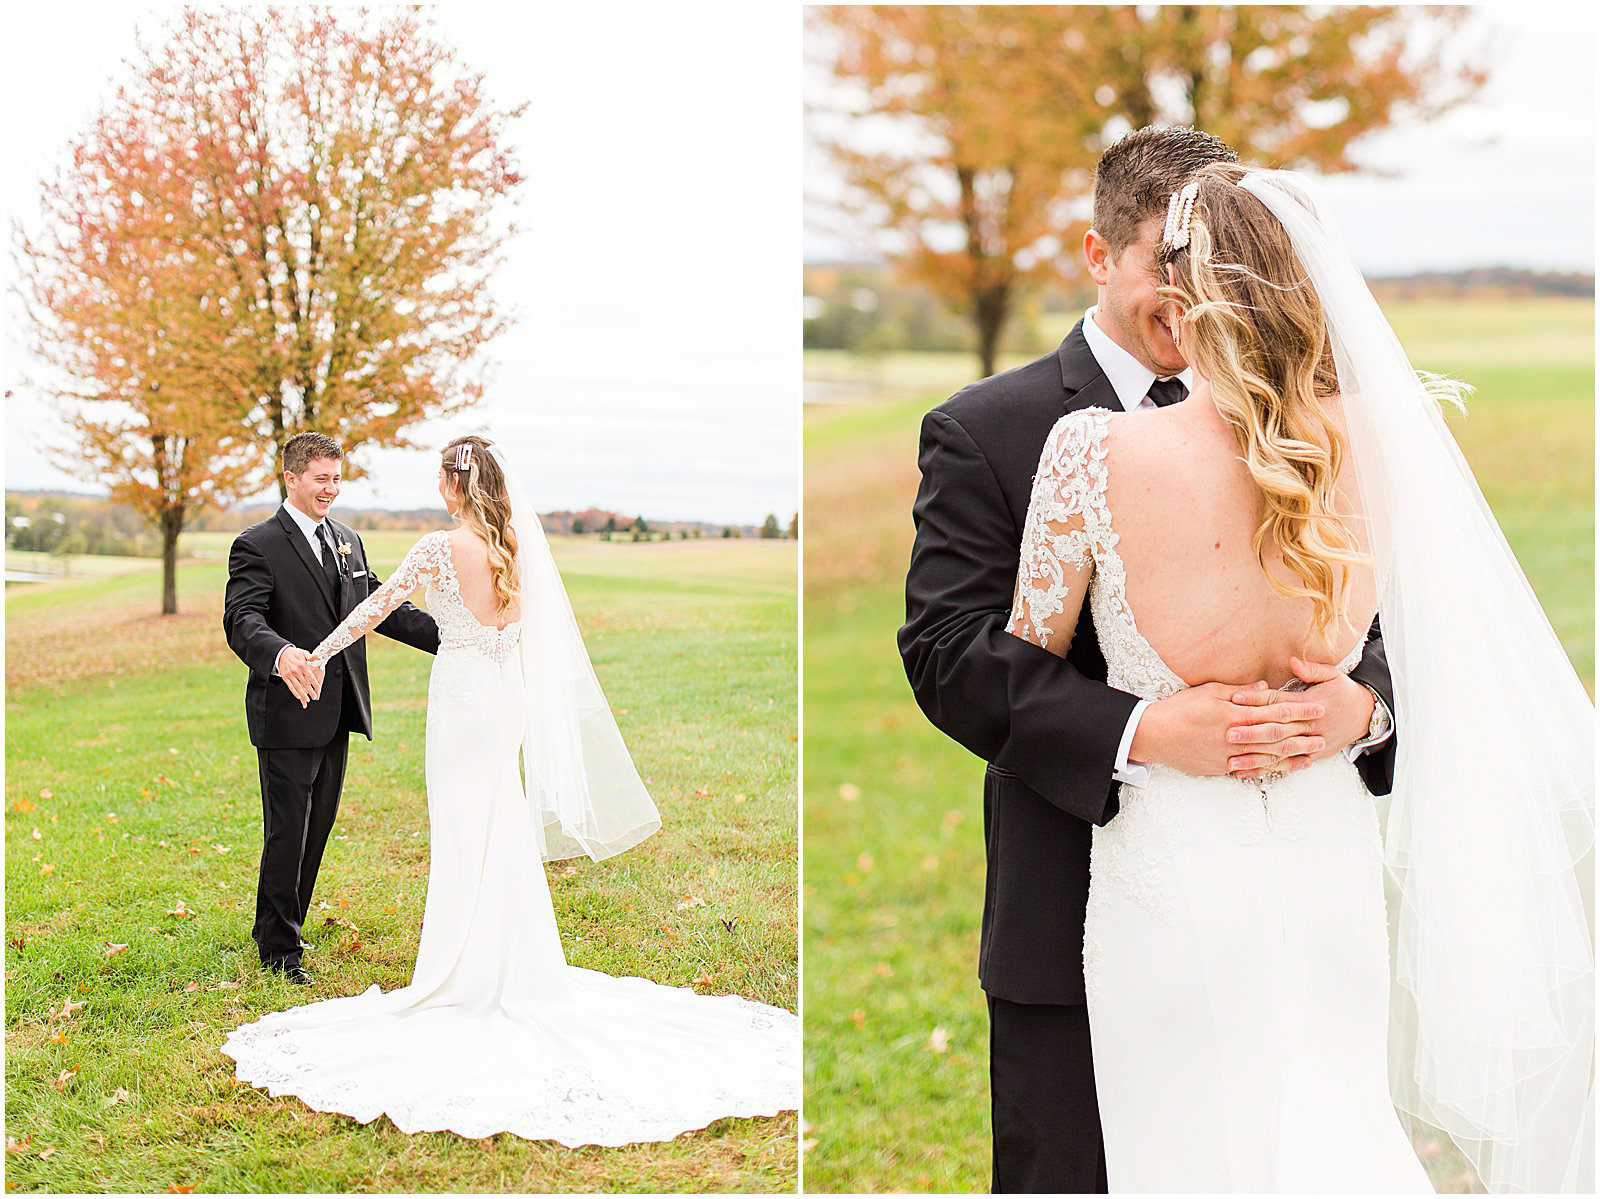 A Romantic Fall Wedding in Ferdinand, IN | Tori and Kyle | Bret and Brandie Photography 0052.jpg